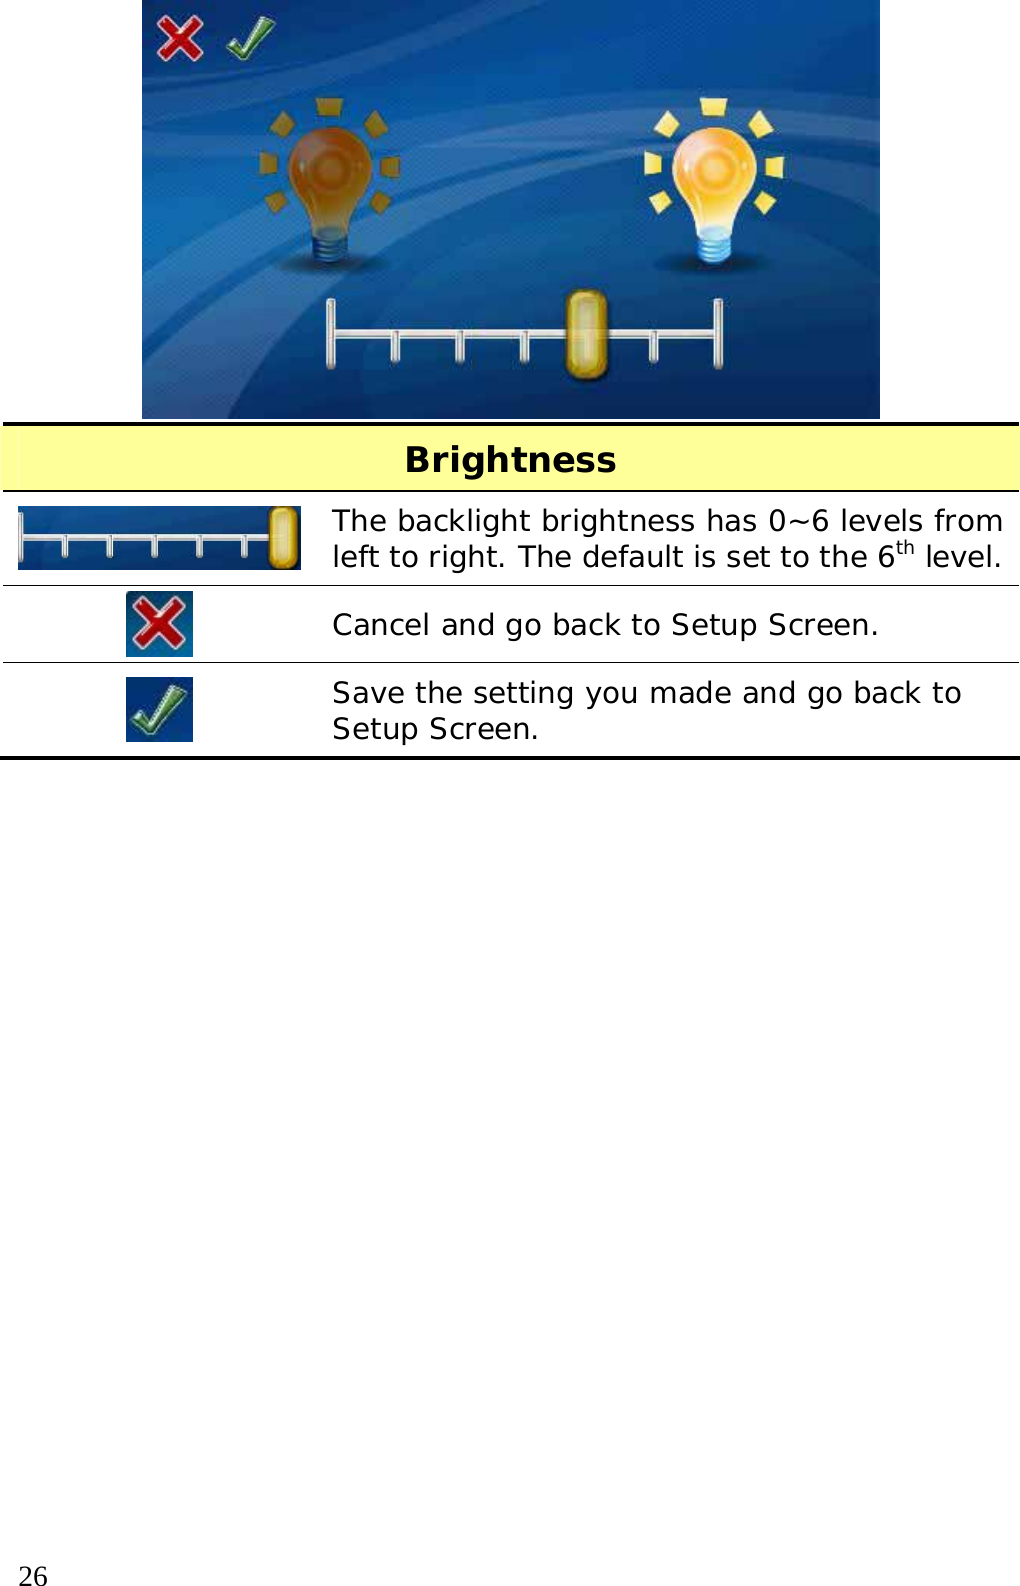  26  Brightness  The backlight brightness has 0~6 levels from left to right. The default is set to the 6th level.  Cancel and go back to Setup Screen.  Save the setting you made and go back to Setup Screen. 